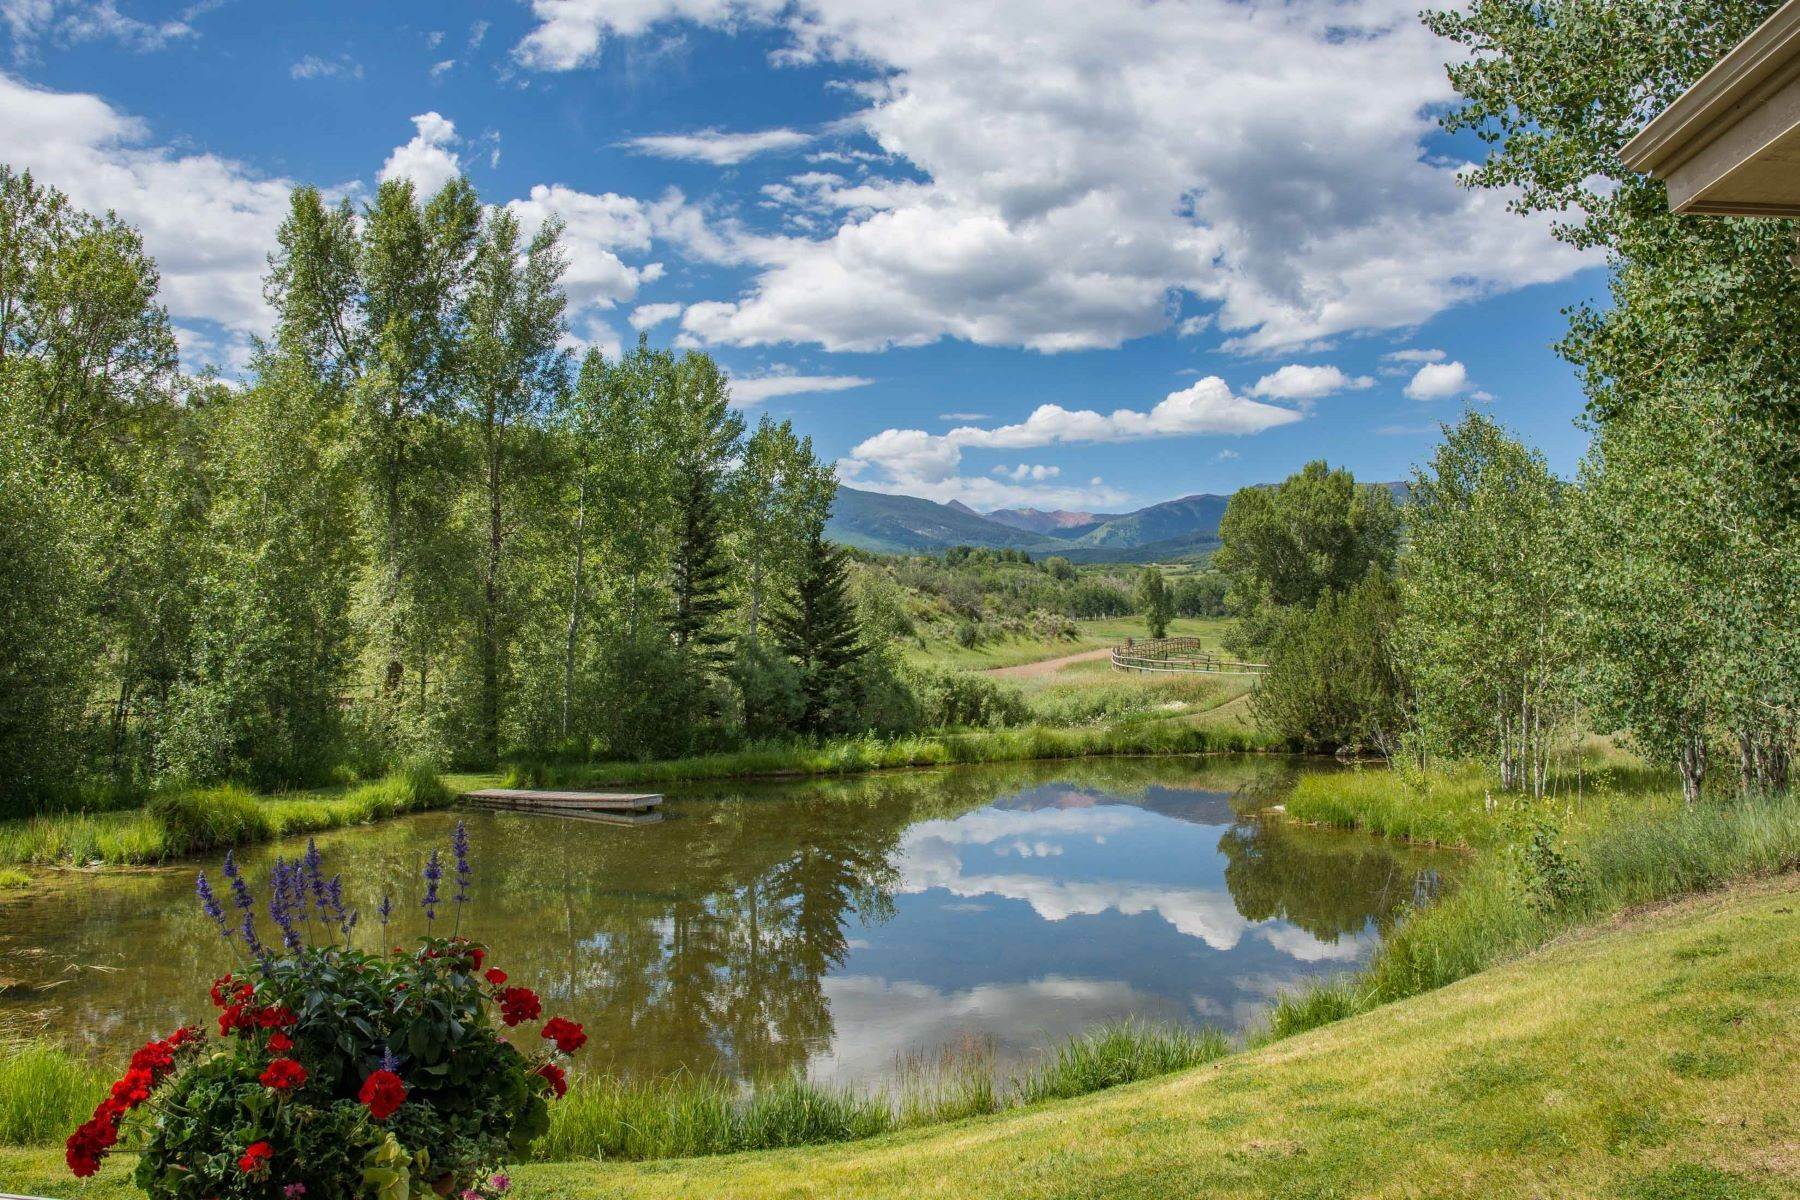 Farm and Ranch Properties للـ Sale في RARE and UNIQUE opportunity to own the heart of the renowned McCabe Ranch! 1321 Elk Creek & TBD McCabe Ranch, Old Snowmass, Colorado 81654 United States